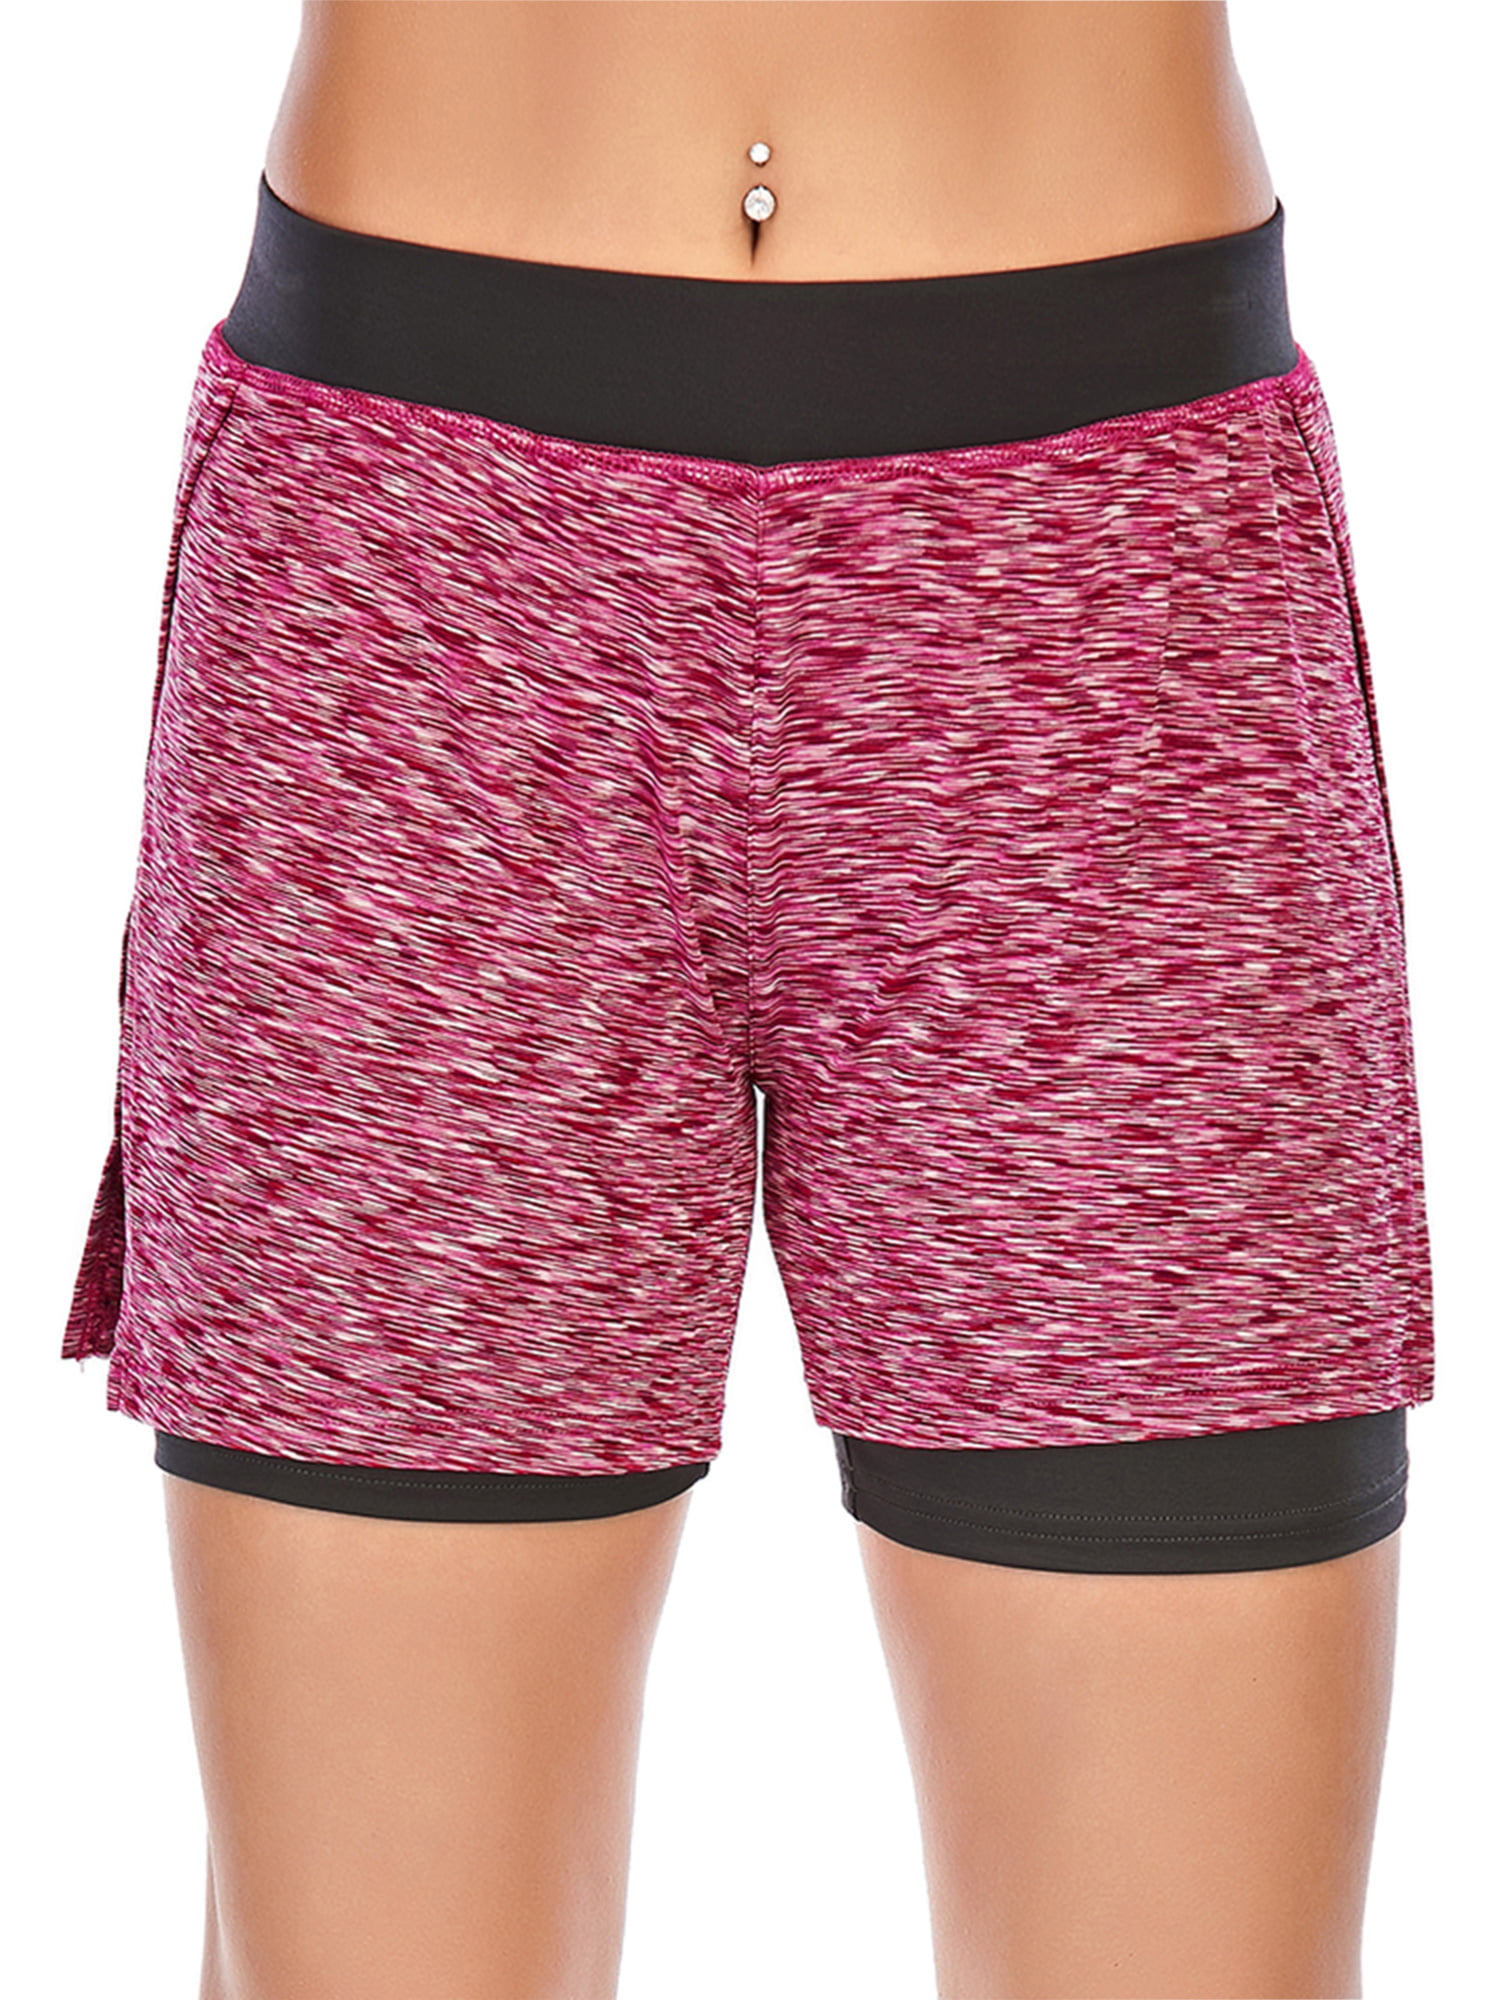 Women Double Layer Sport Shorts 2 in 1 Workout Running Shorts Active Yoga  Gym Sport Shorts with Pocket - Walmart.com